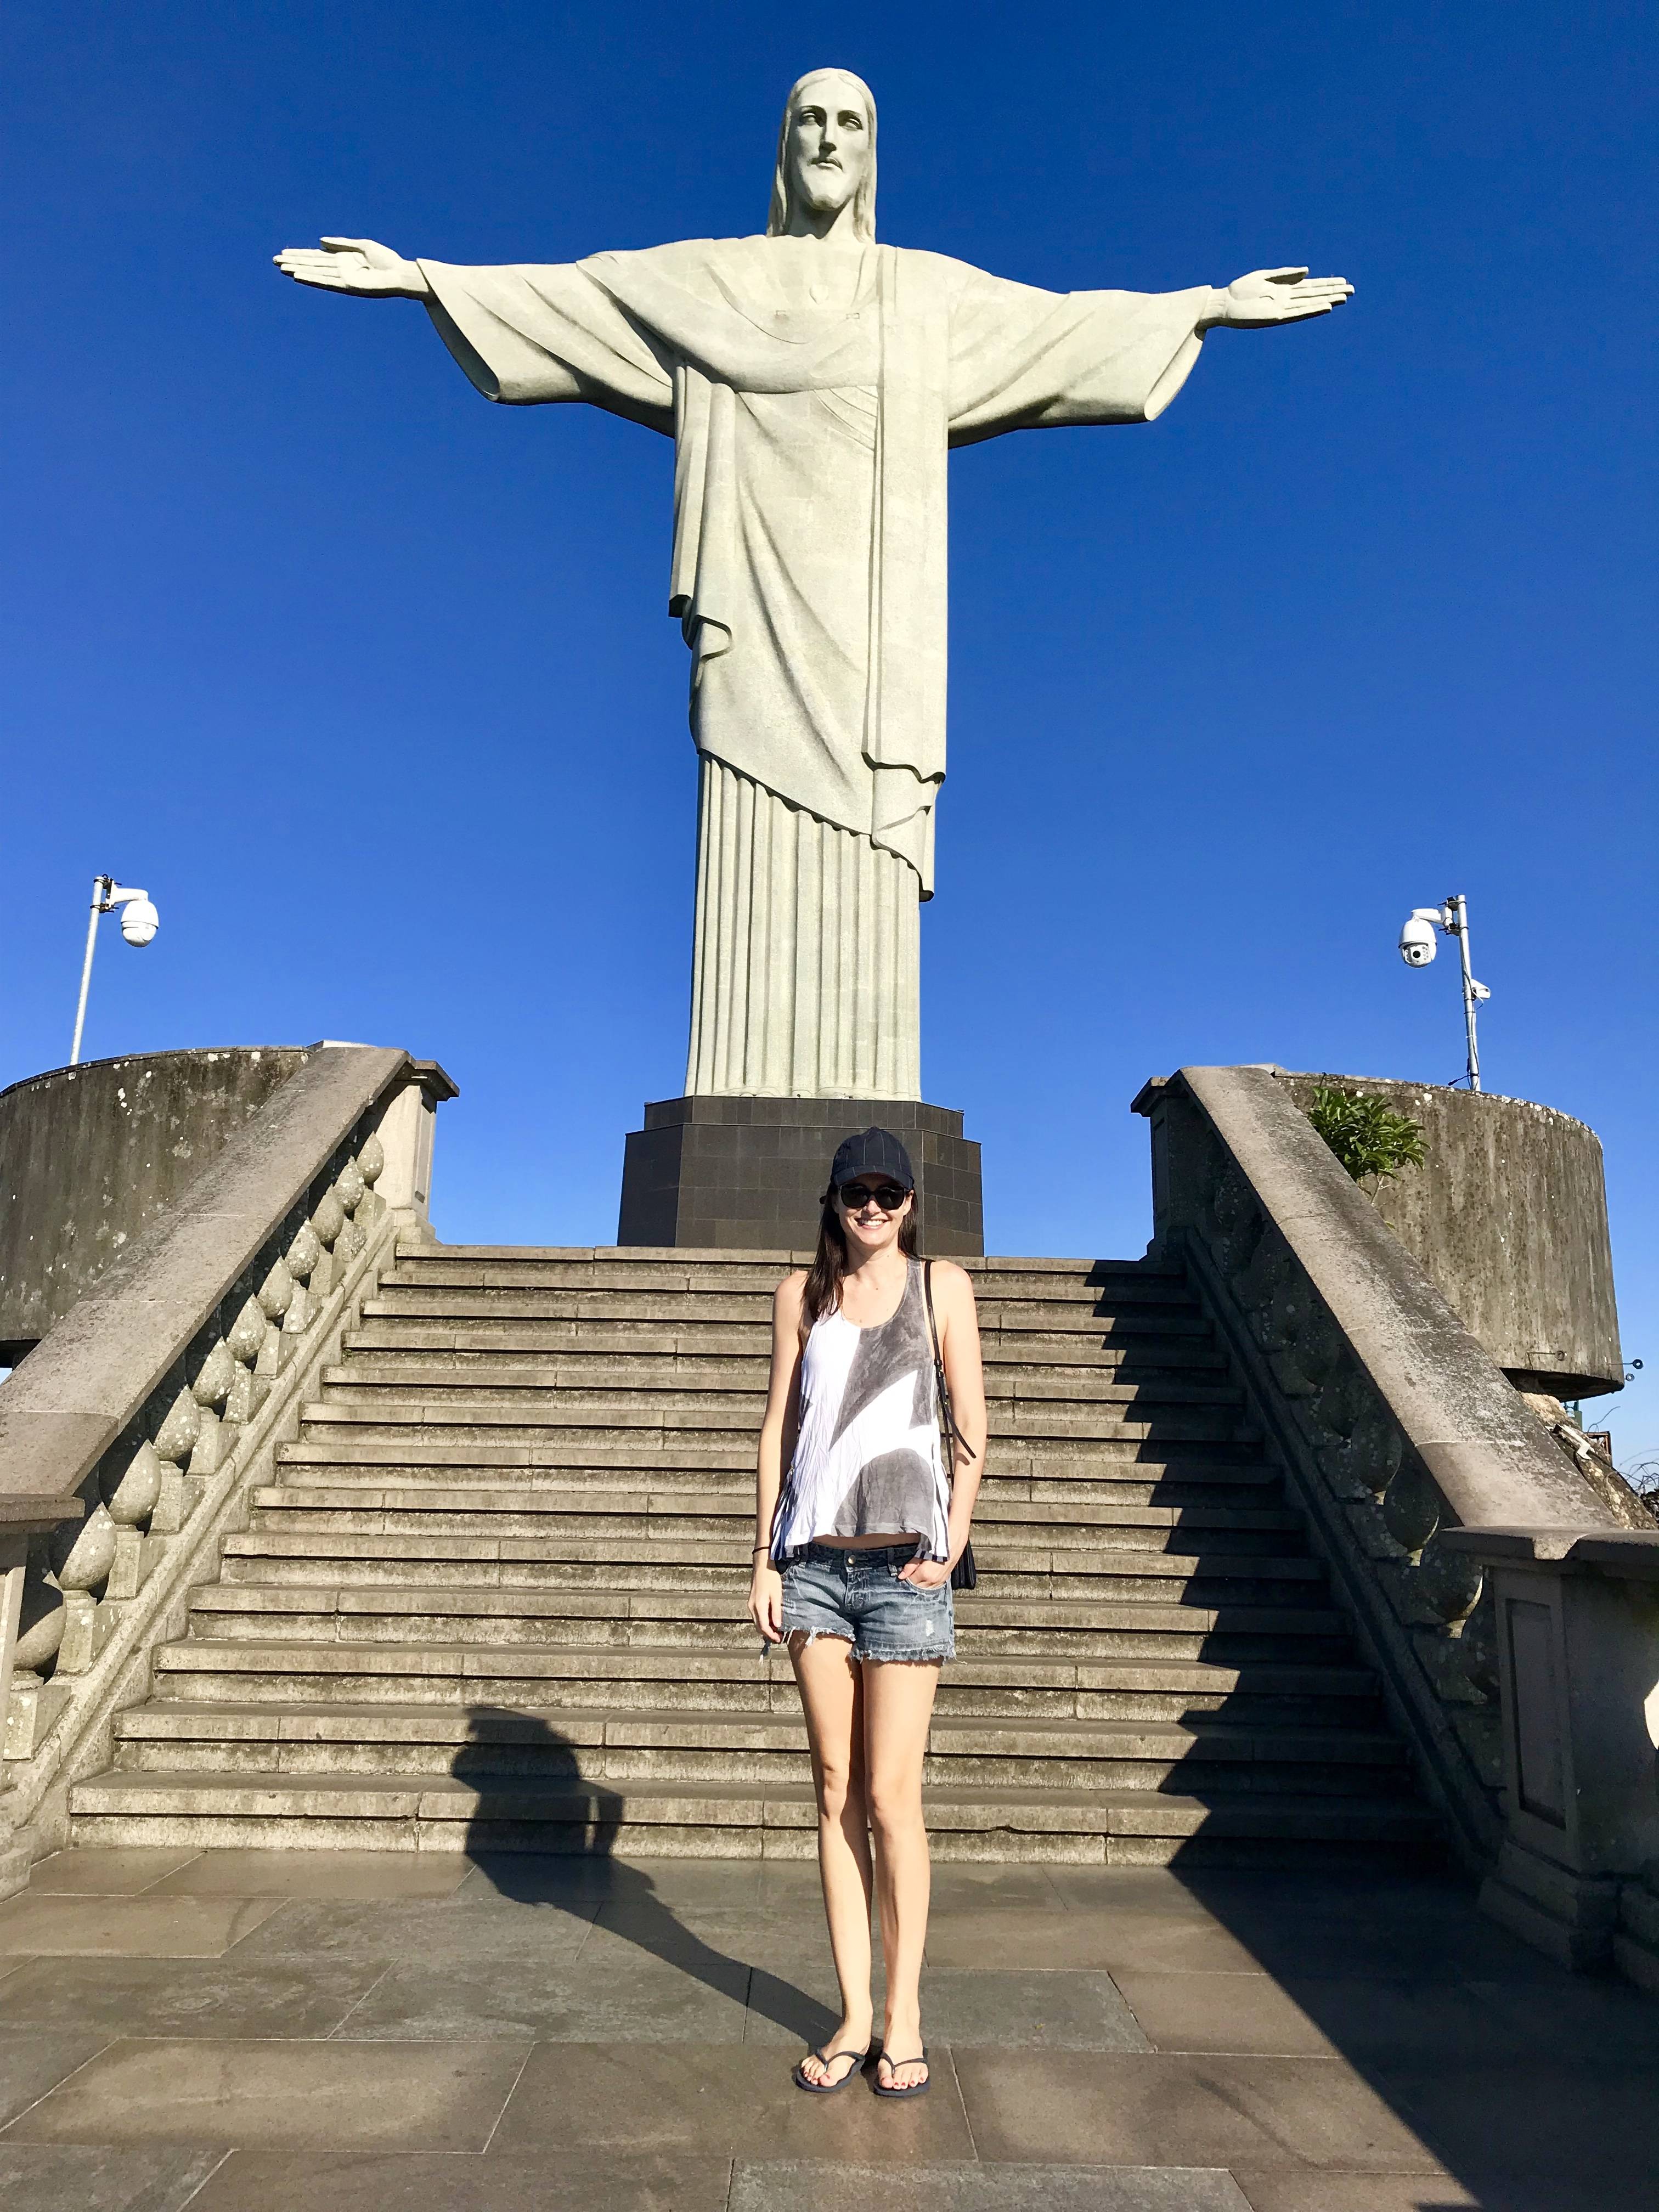 Things to do in Rio de Janeiro - Christ the Redeemer with no crowds